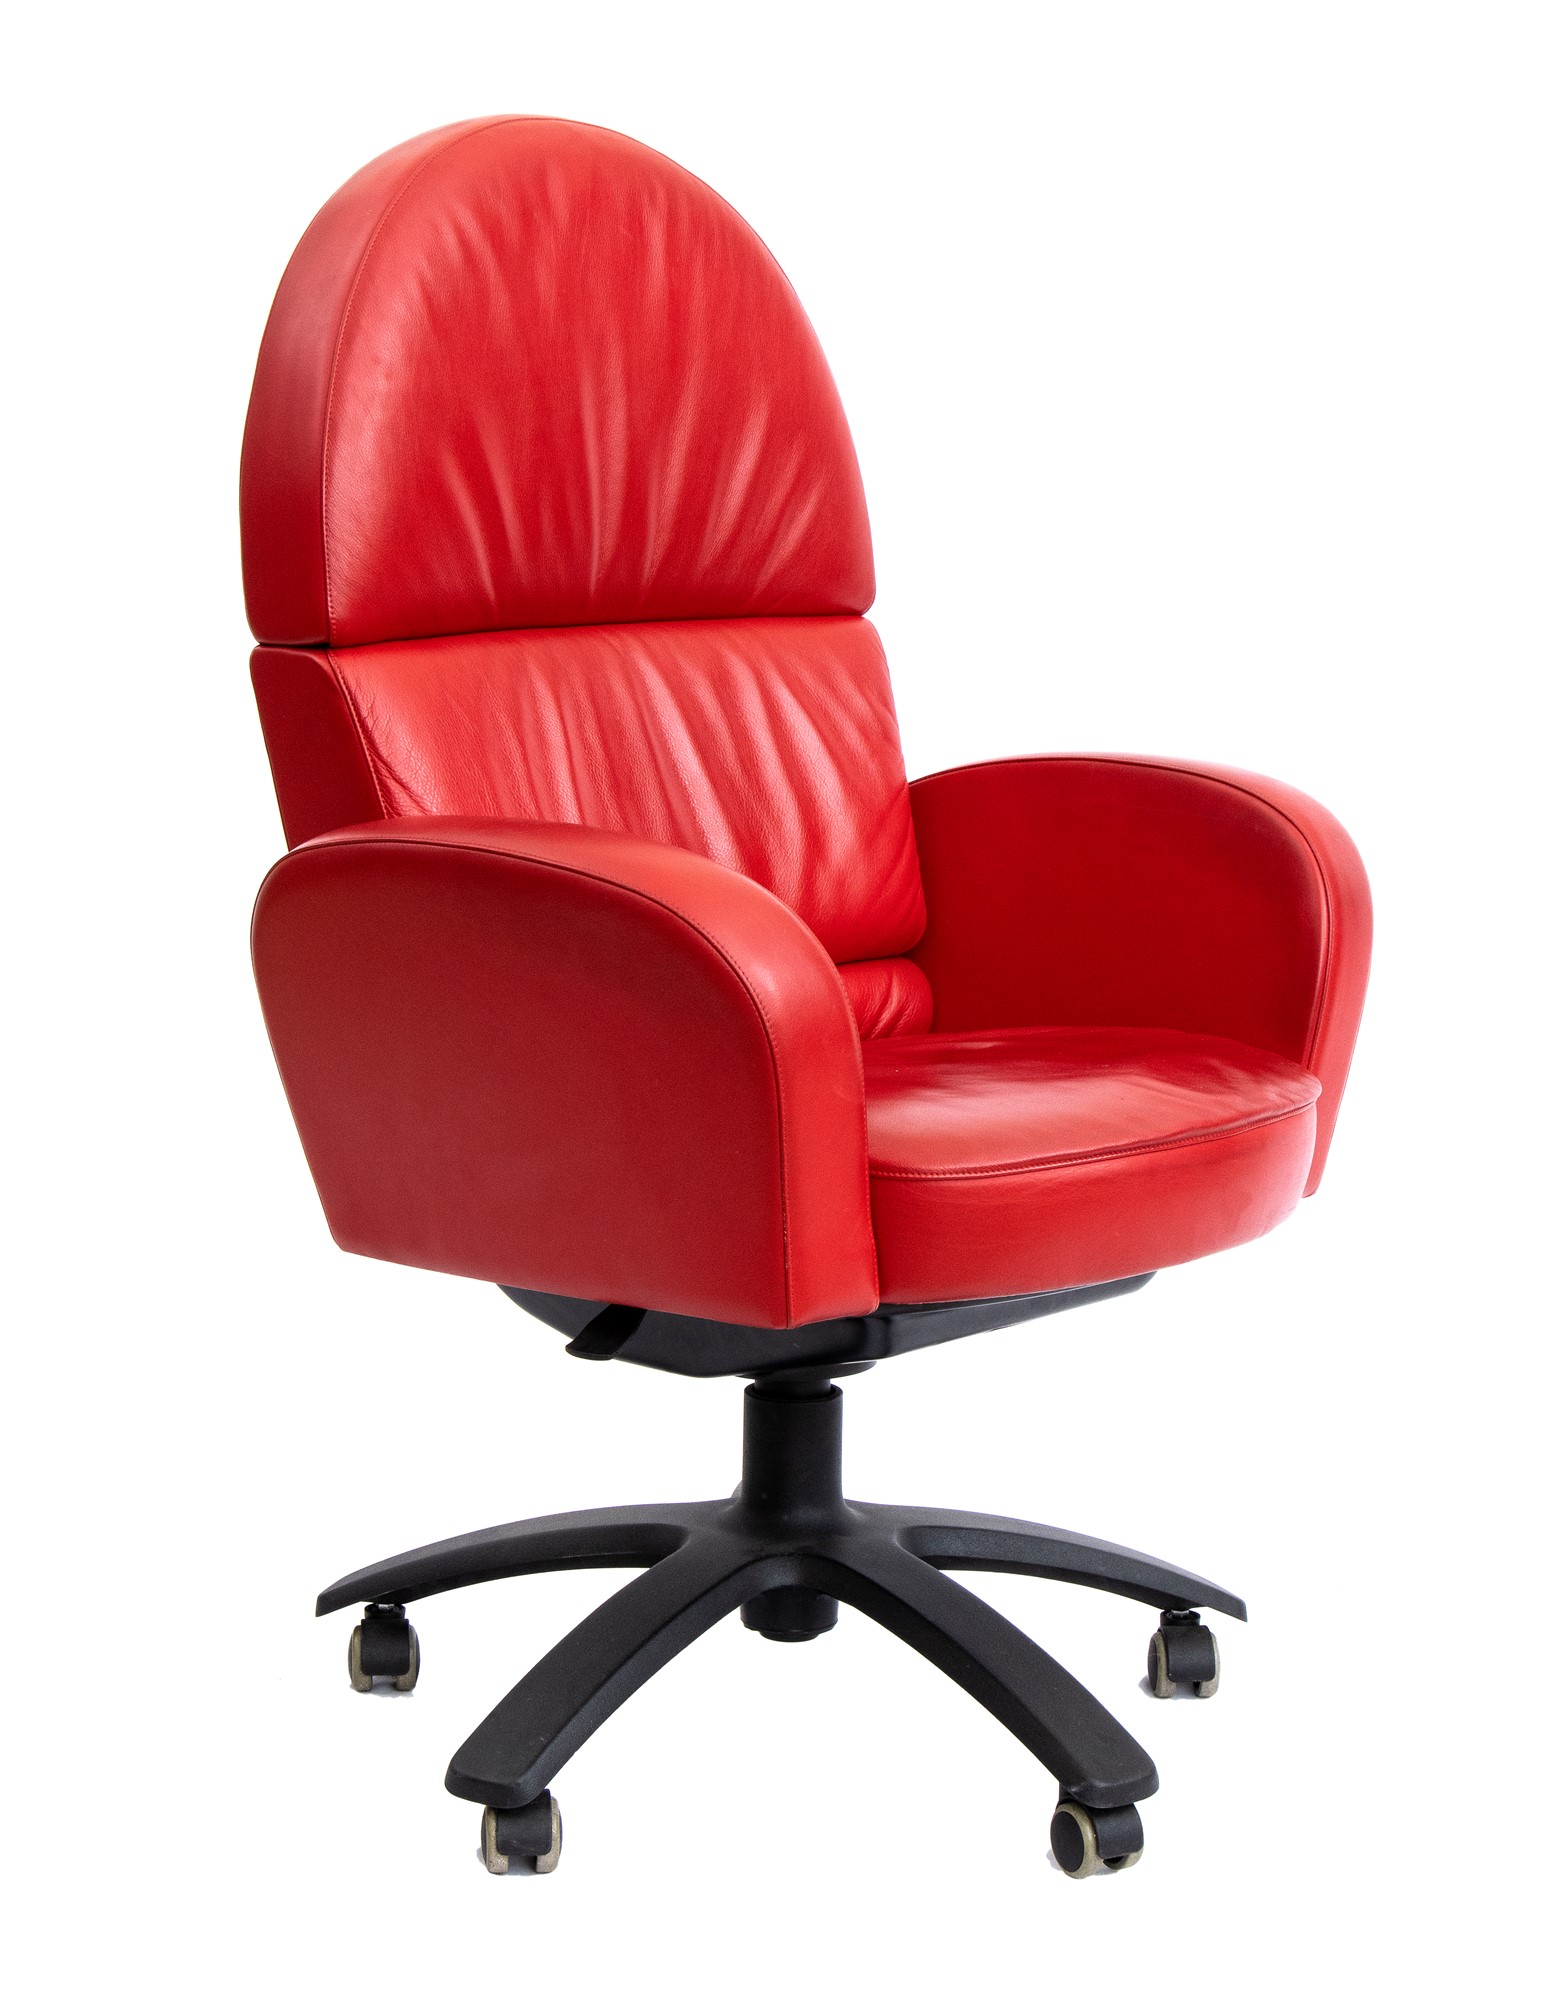 Paolo Pininfarina Torino 1958-Torino 2024 Lot of 5 Ego armchairs and Ego President executive chair - Image 20 of 29